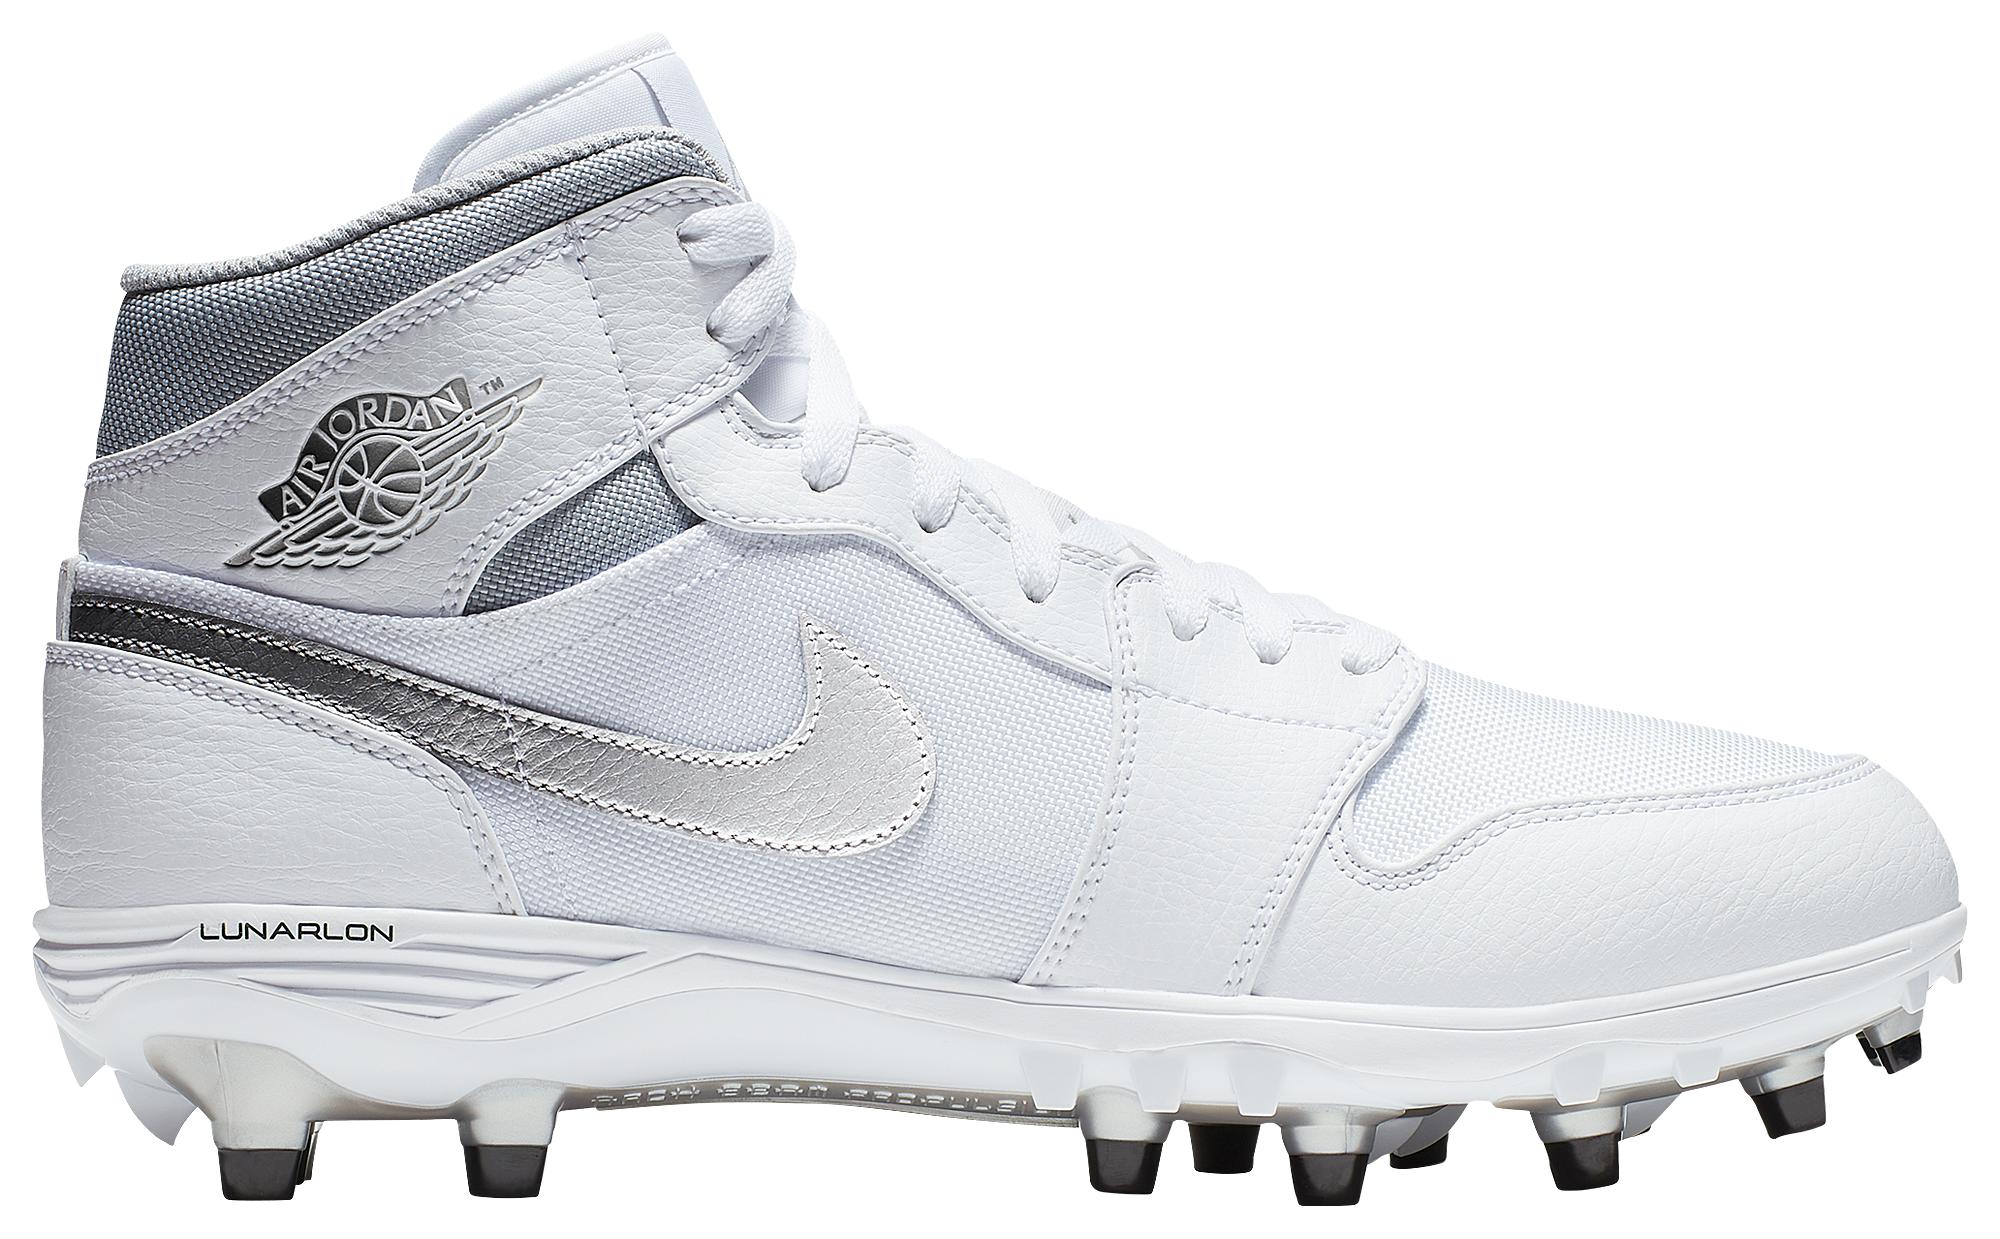 Nike Synthetic Retro 1 Td Mid Molded Cleats Shoes in White/Metallic  Silver/Metallic s (Metallic) for Men - Lyst